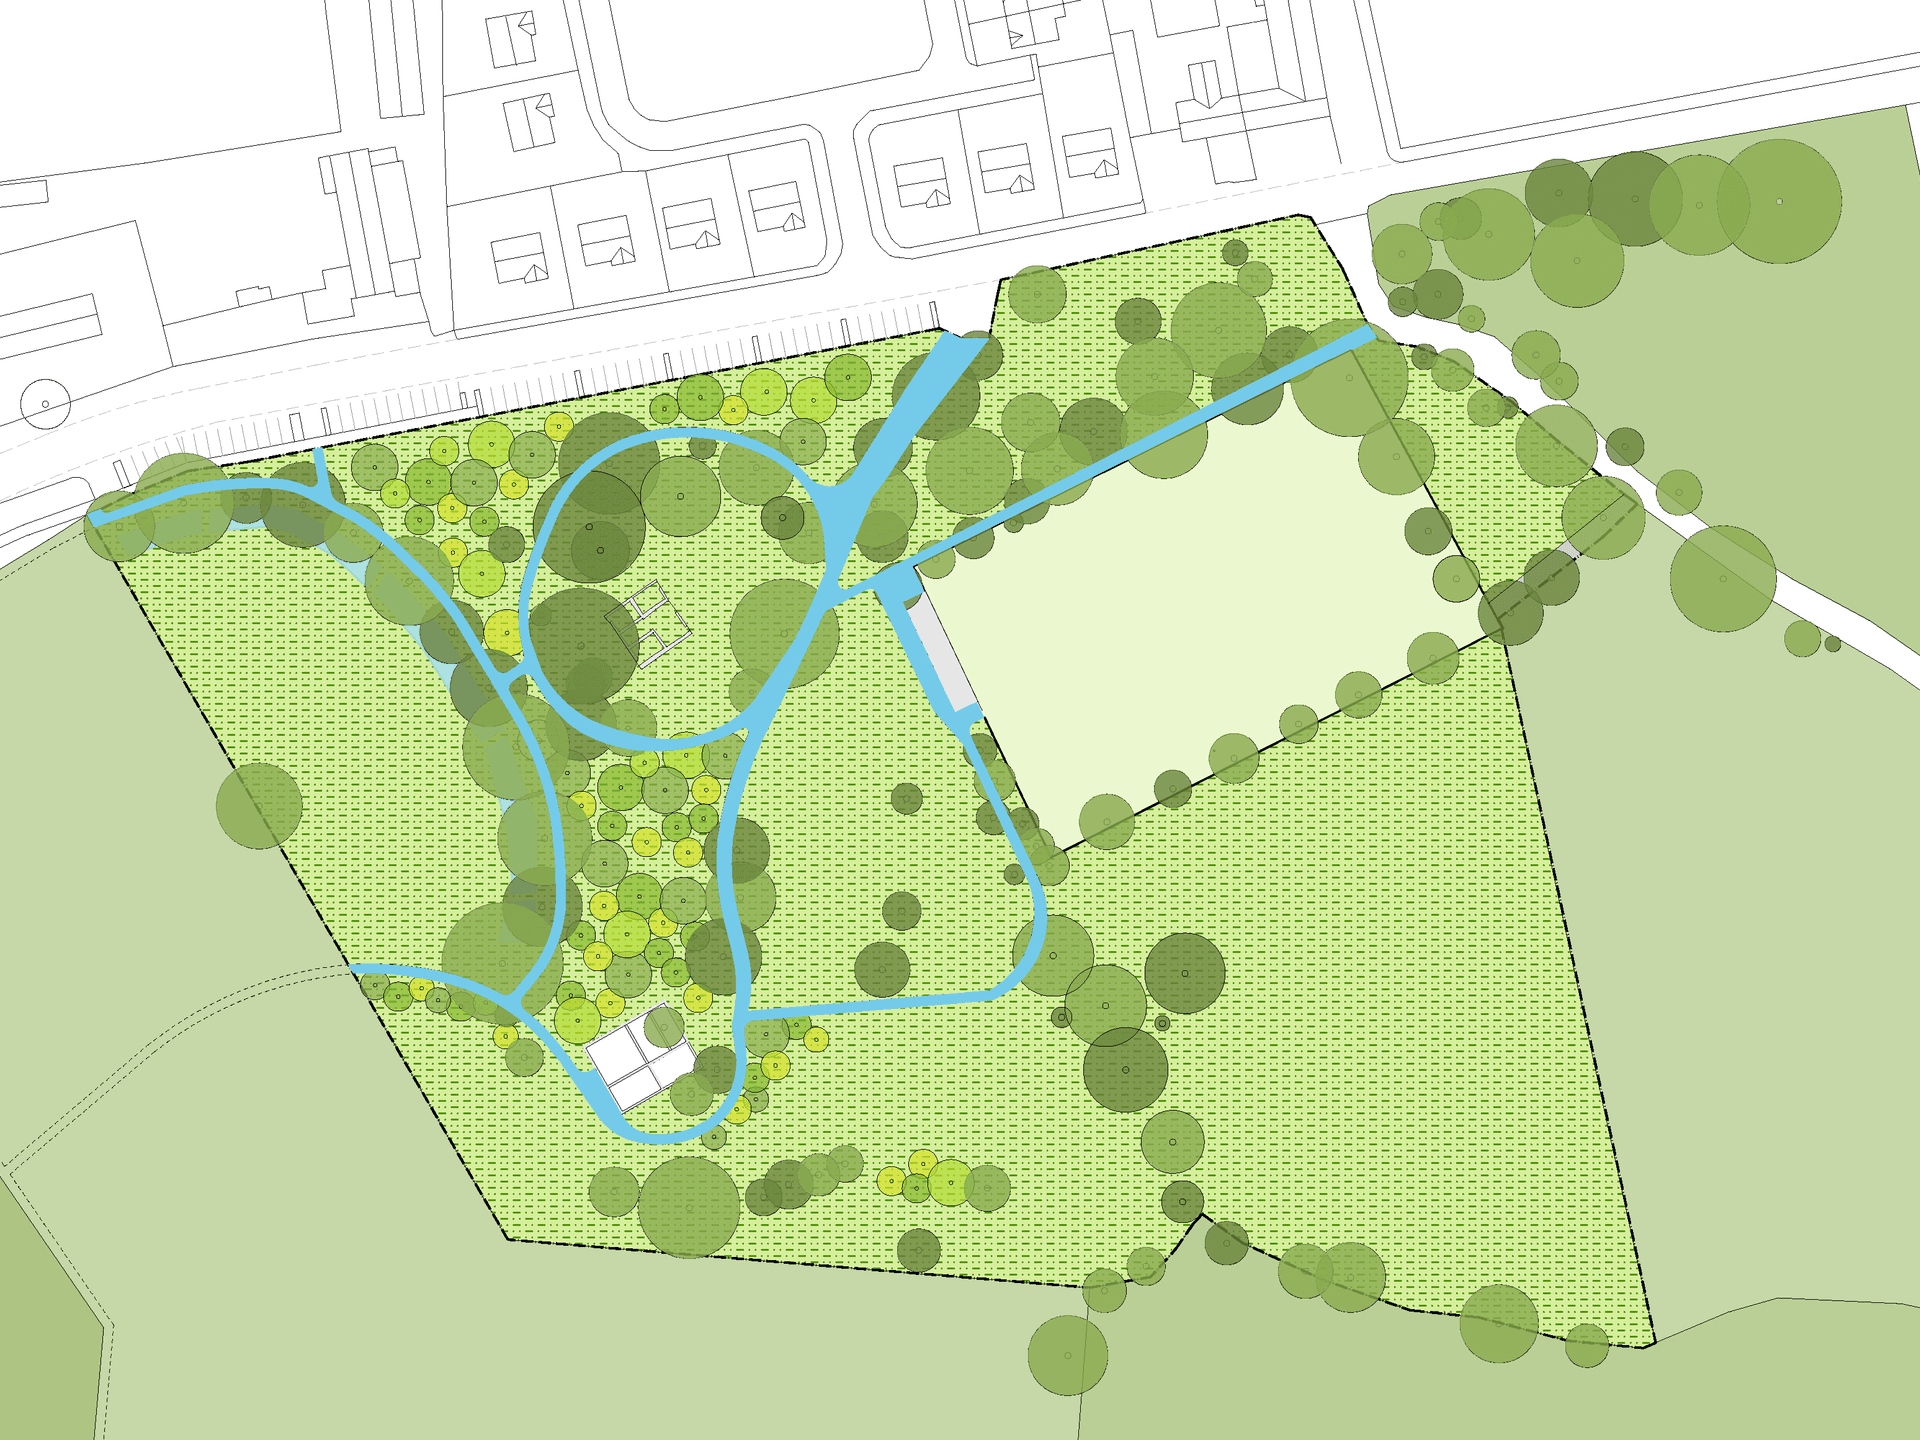 Tracing old historic paths and bringing them back for circulation anddefining landscape zones.